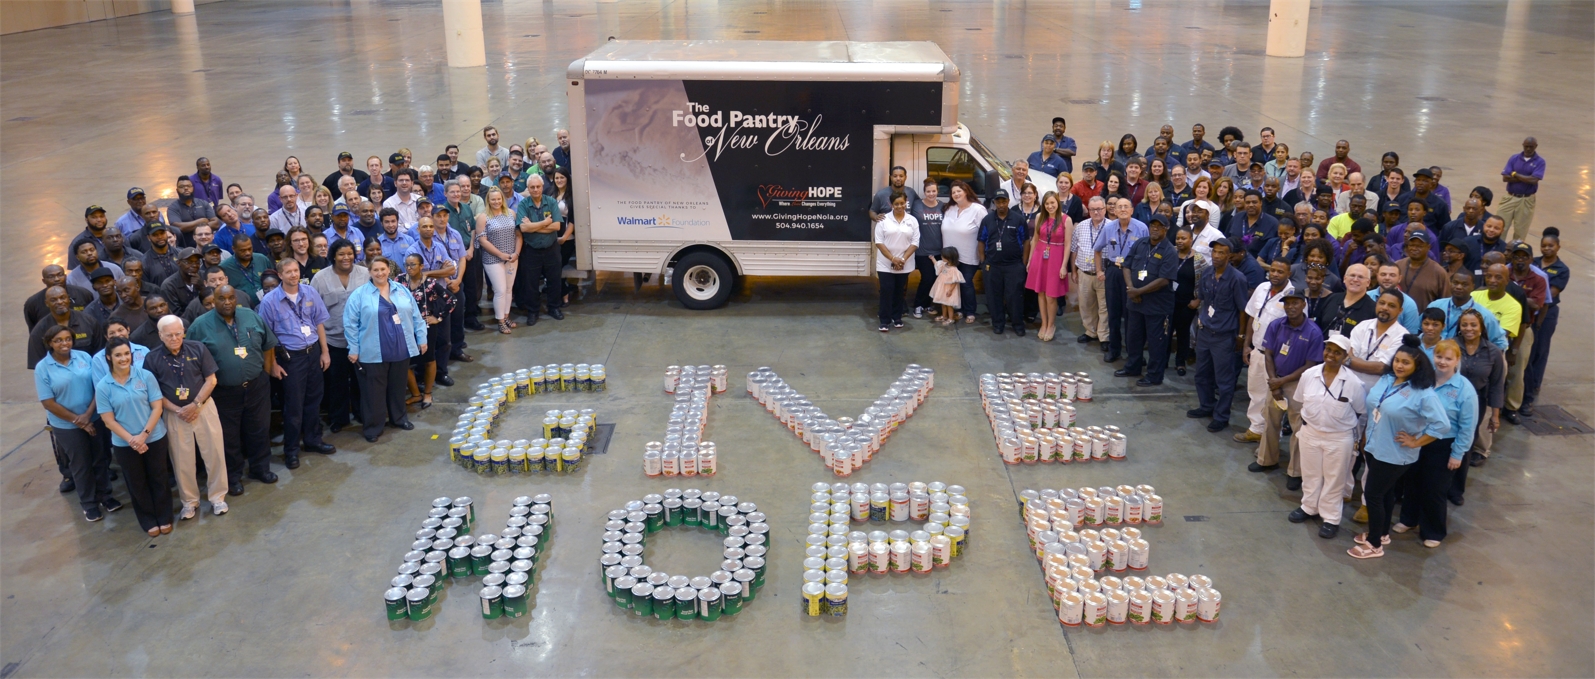 CANstruction Group Photo - Final (1).jpg